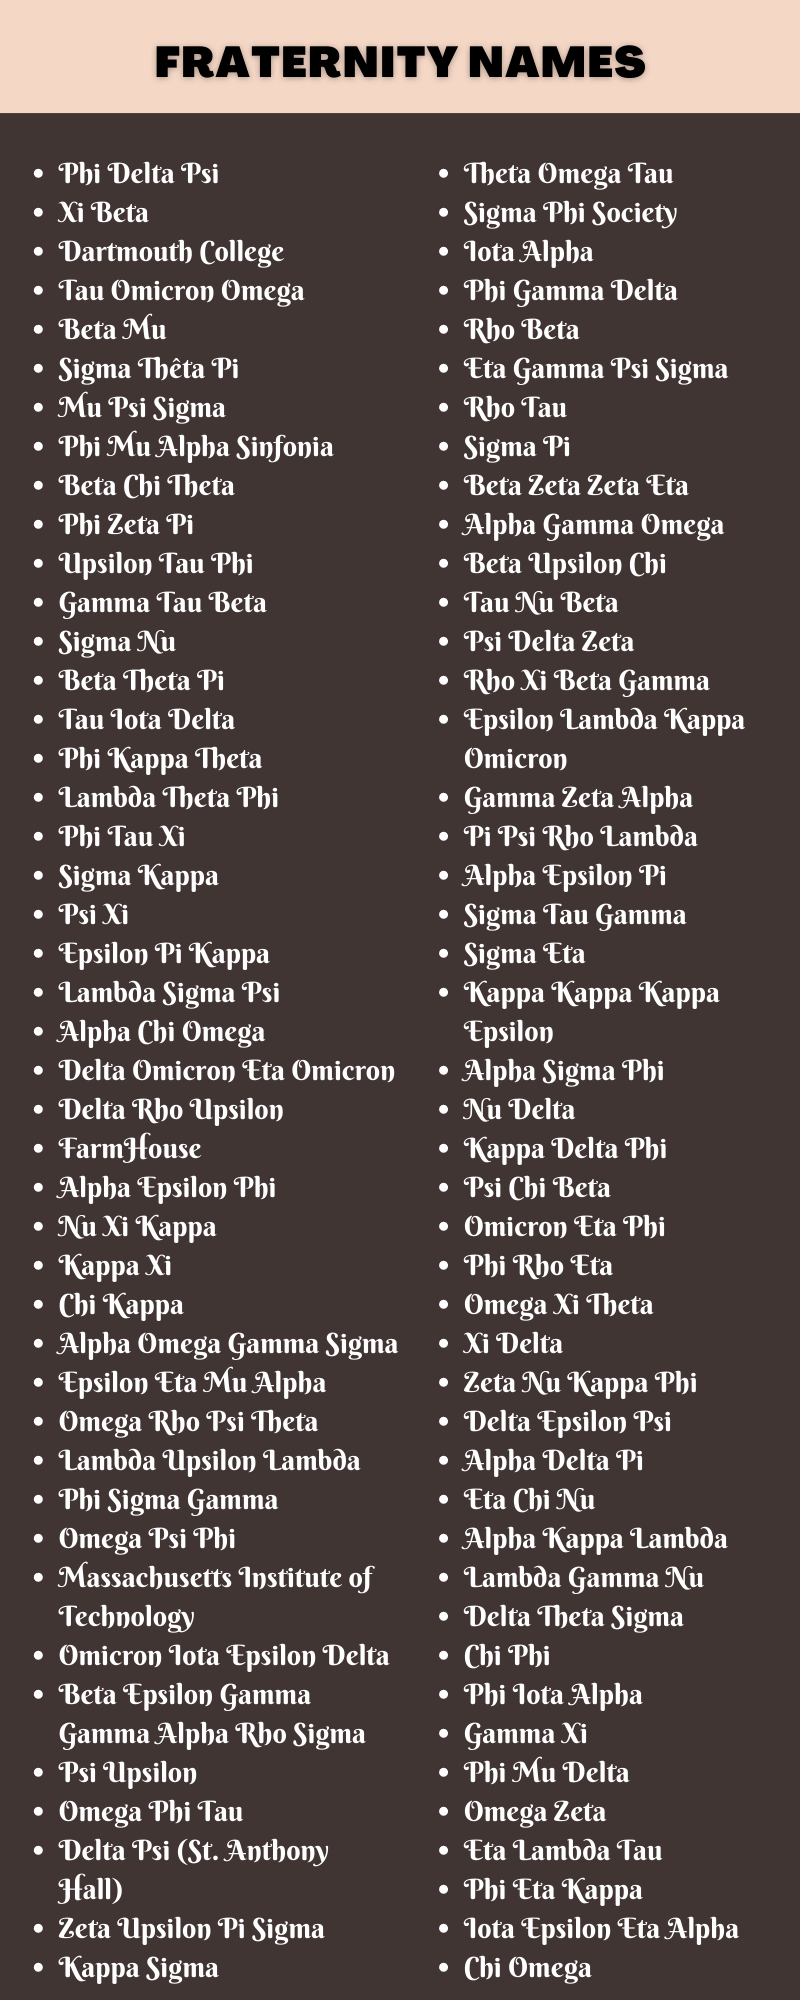 Fraternity Names